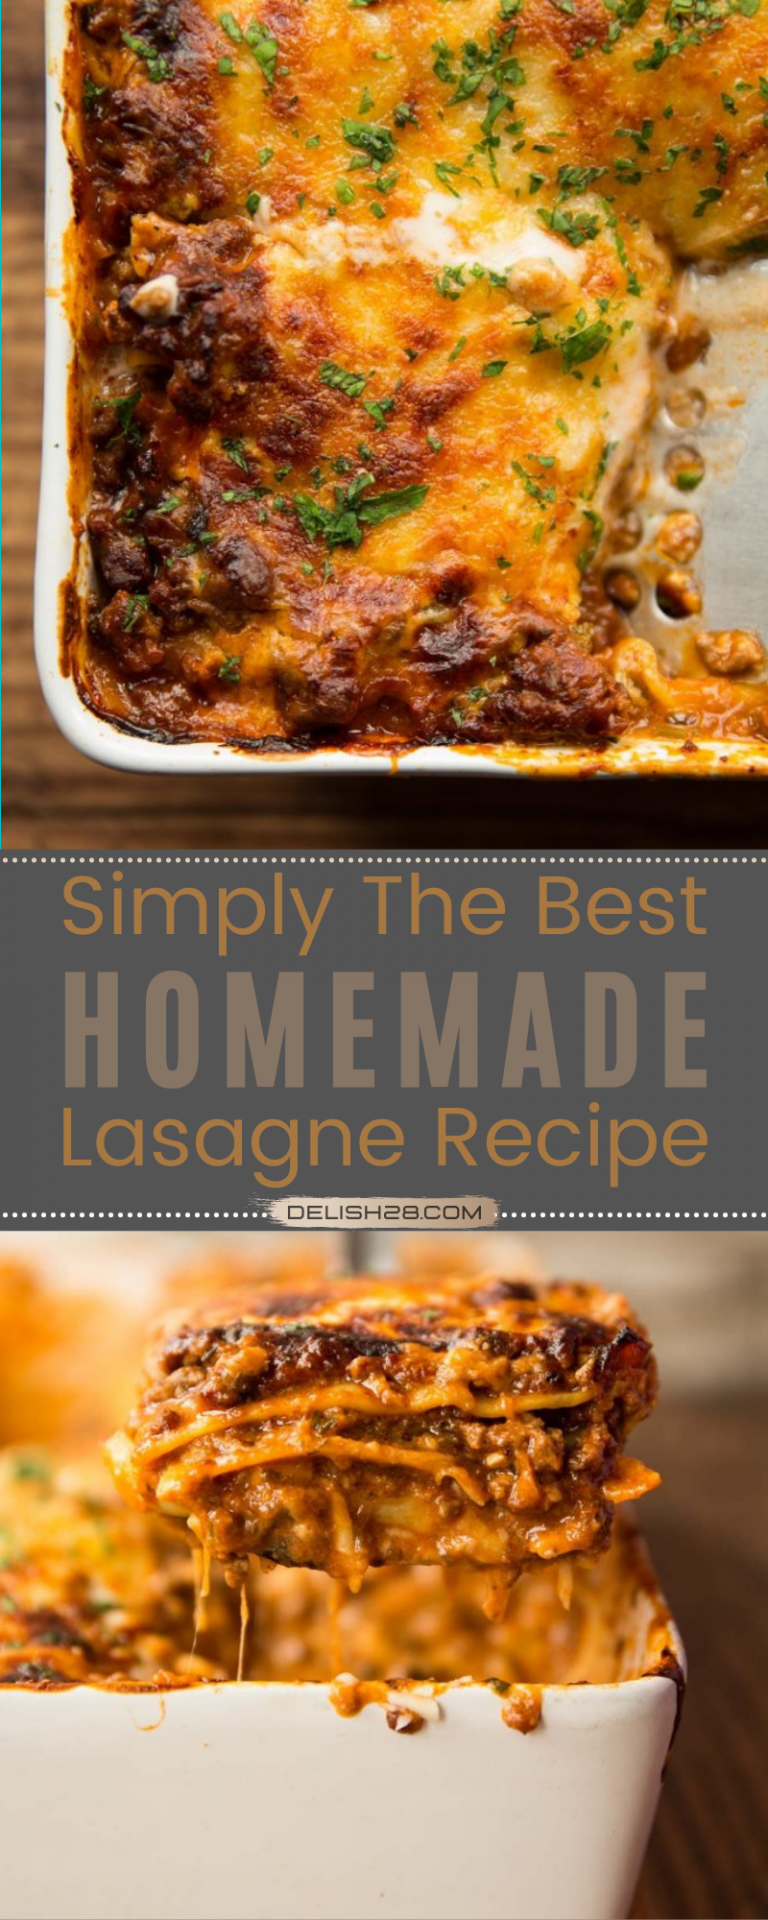 SIMPLY THE BEST HOMEMADE LASAGNE RECIPE - delish28